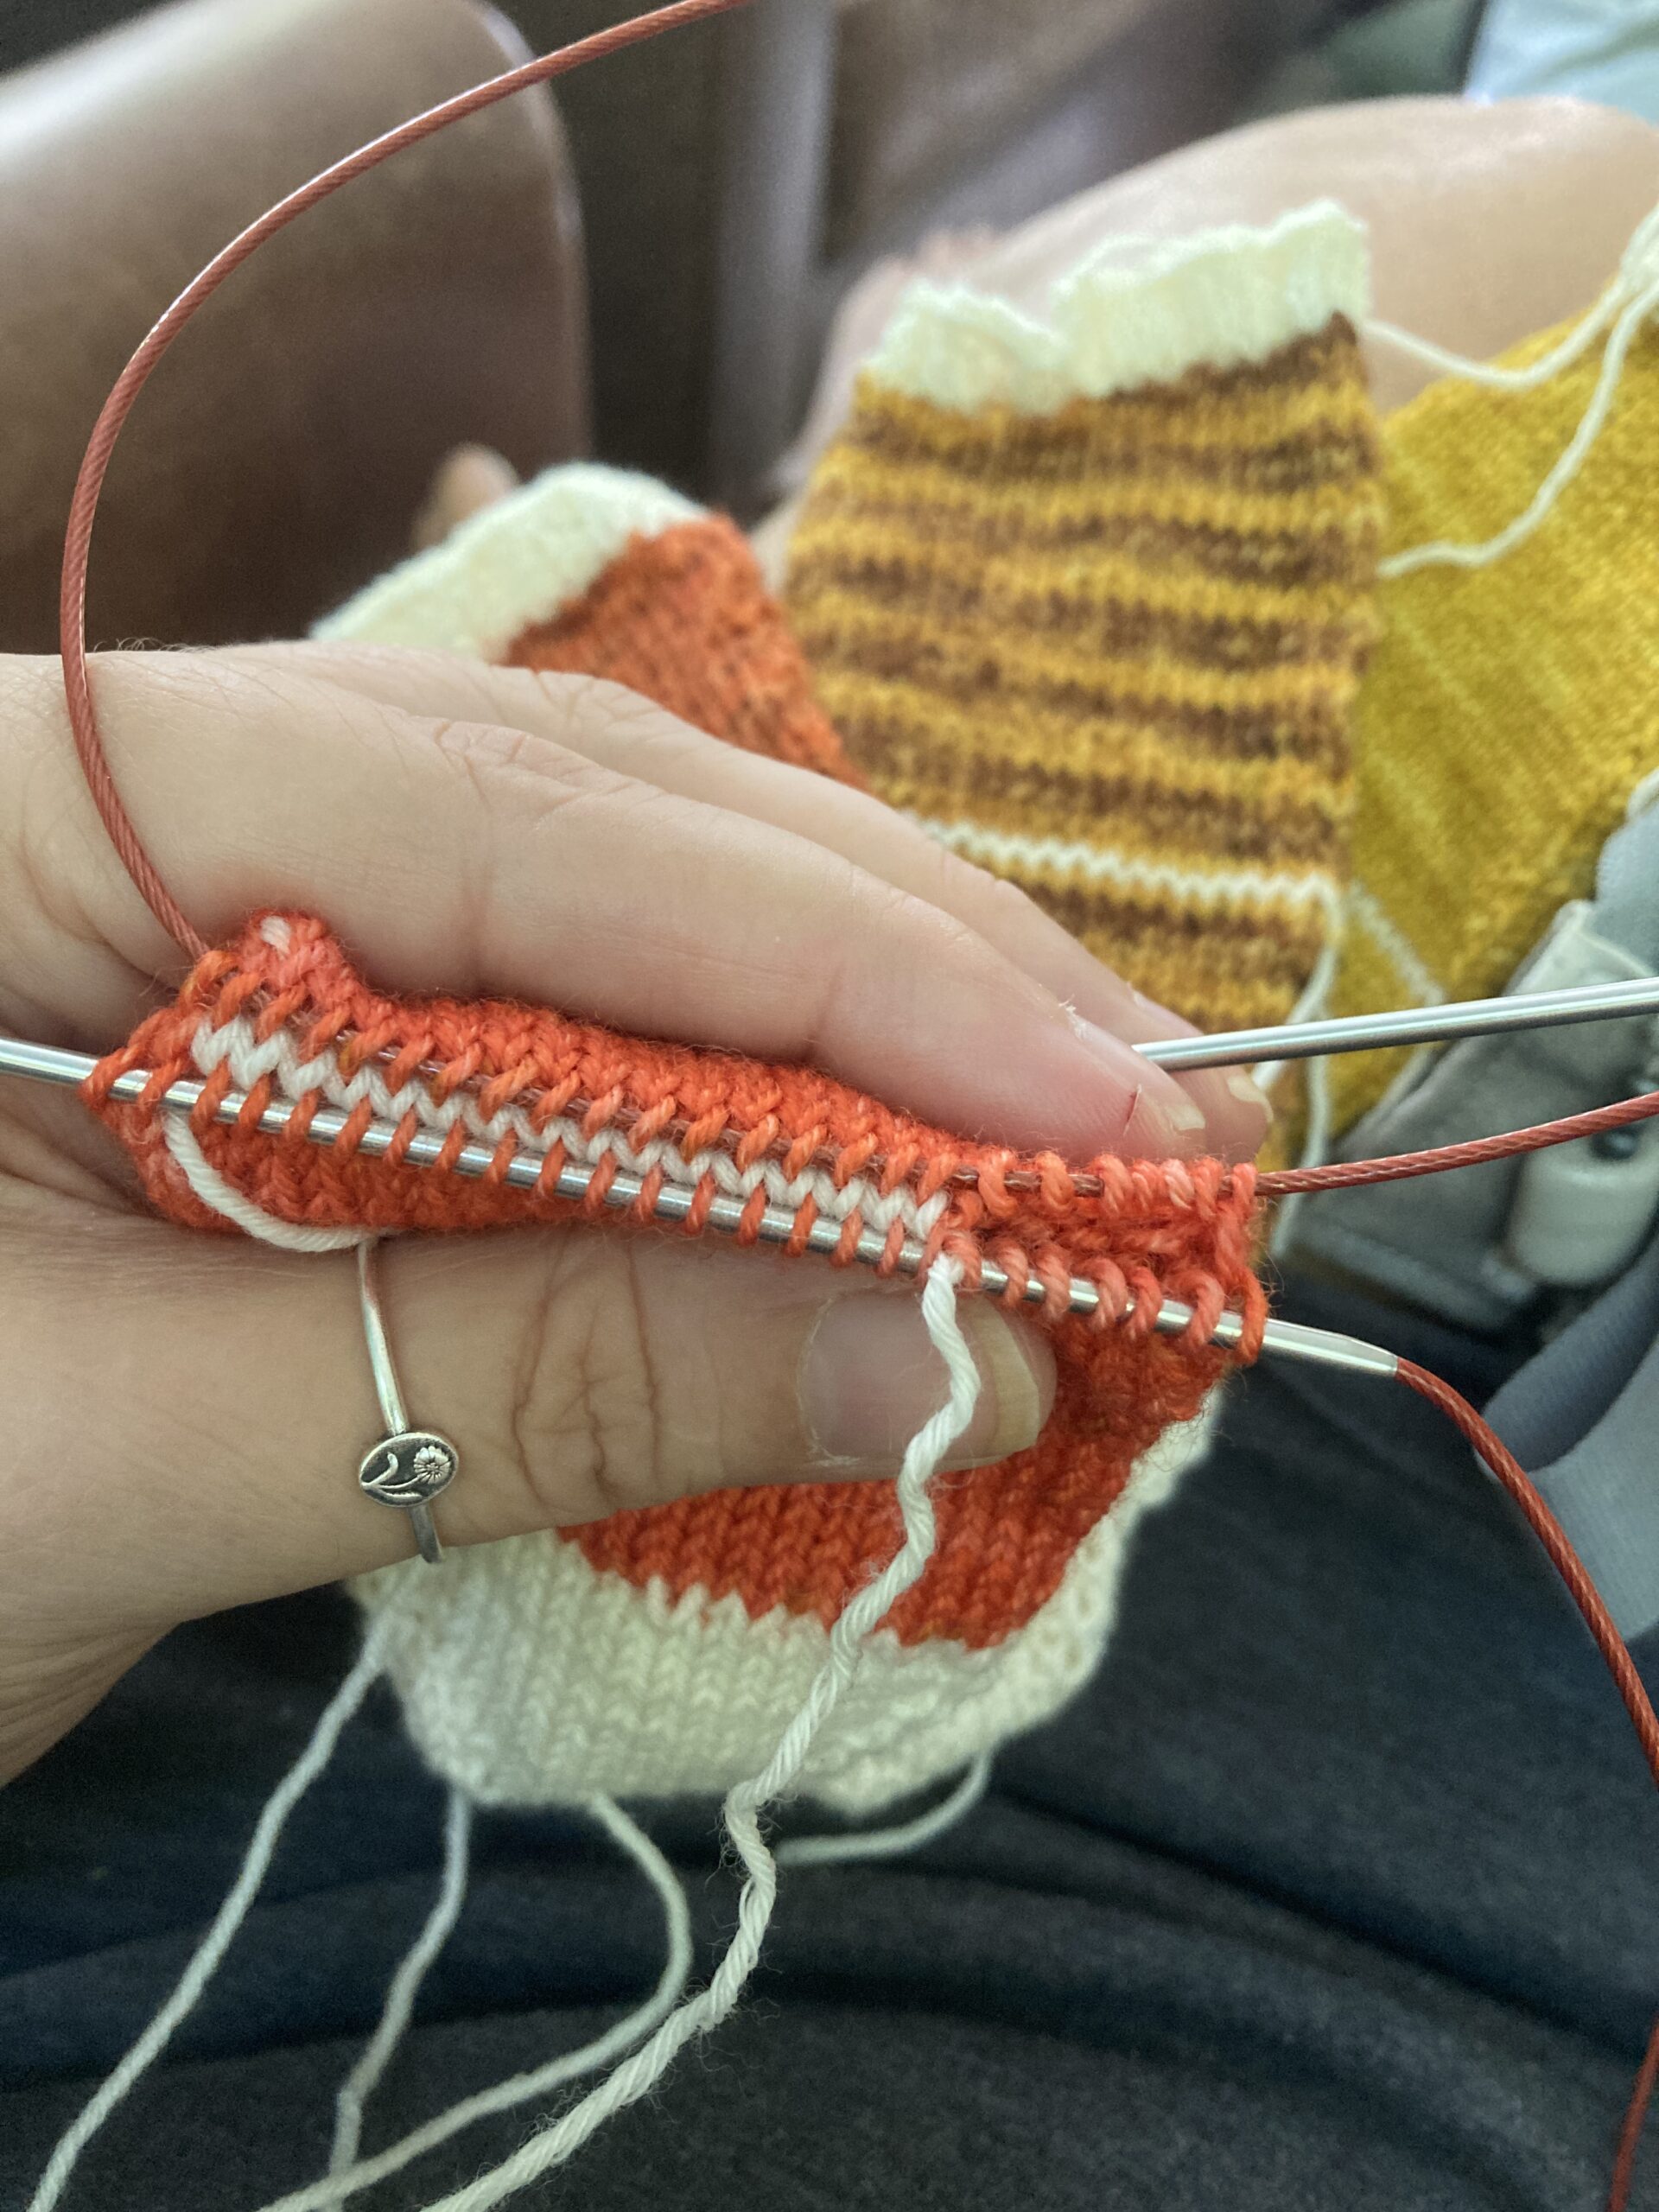 Tiny Stocking afterthought heel in progress